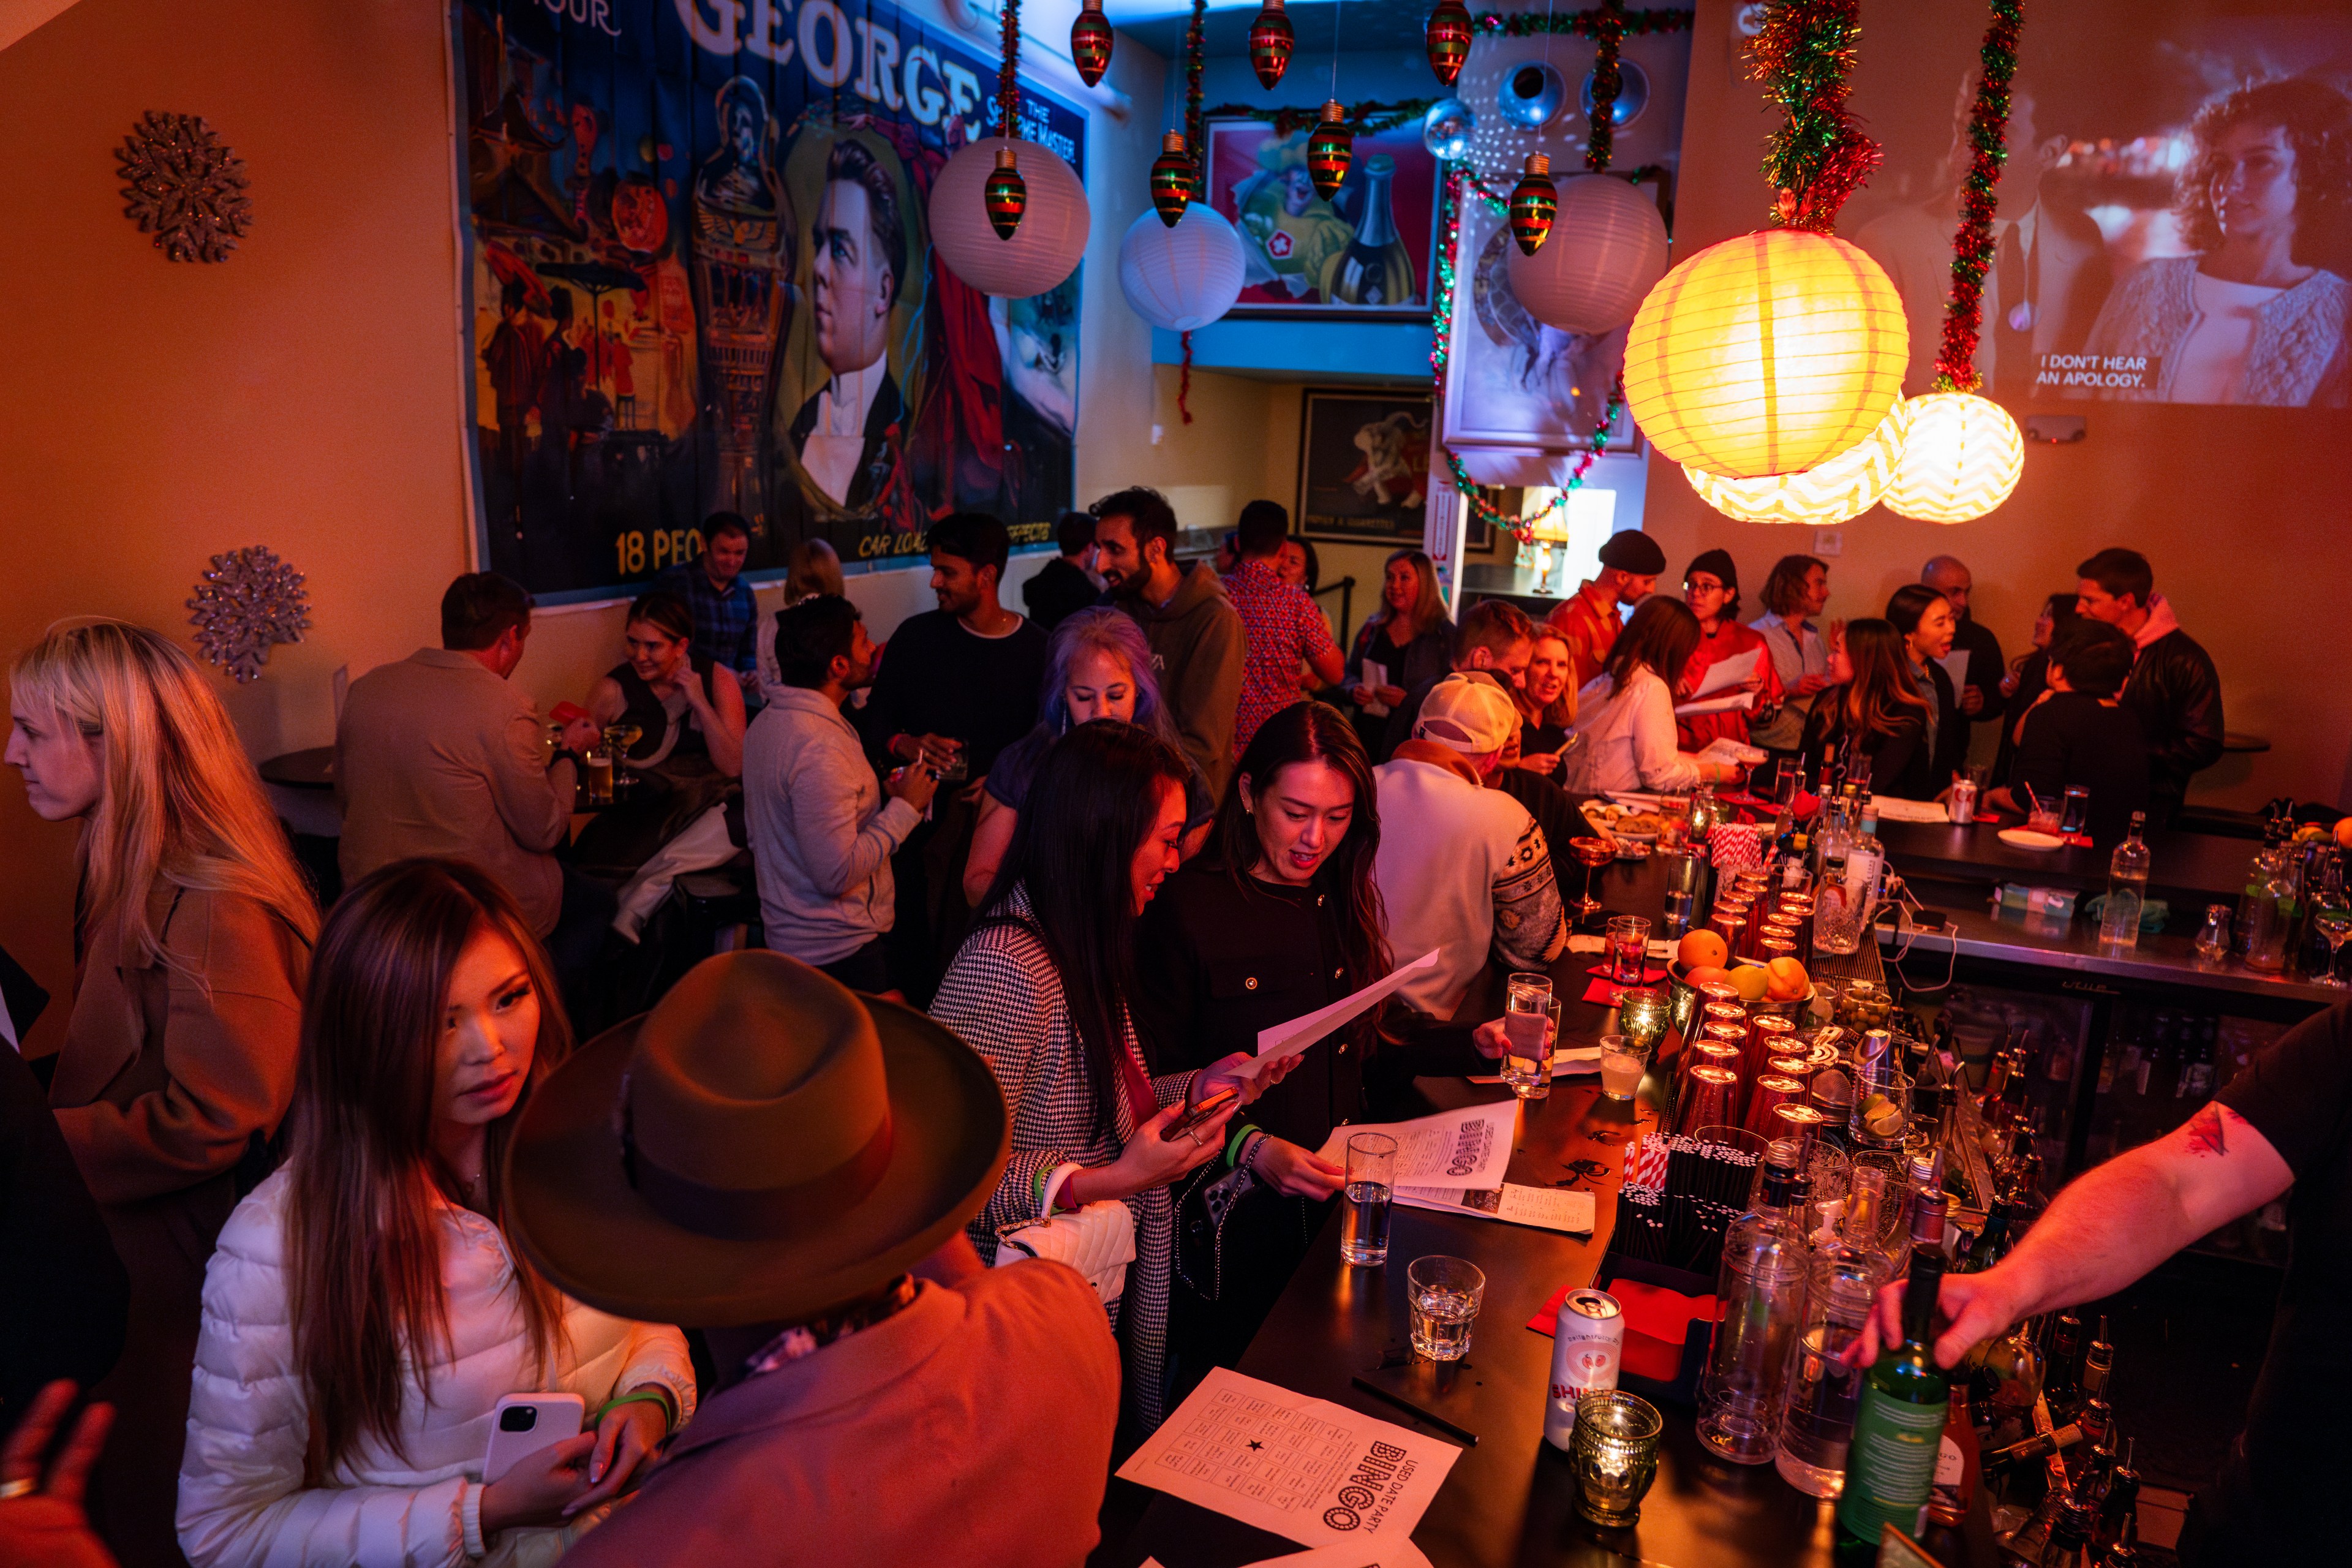 People gather in a bar for a singles mixer.